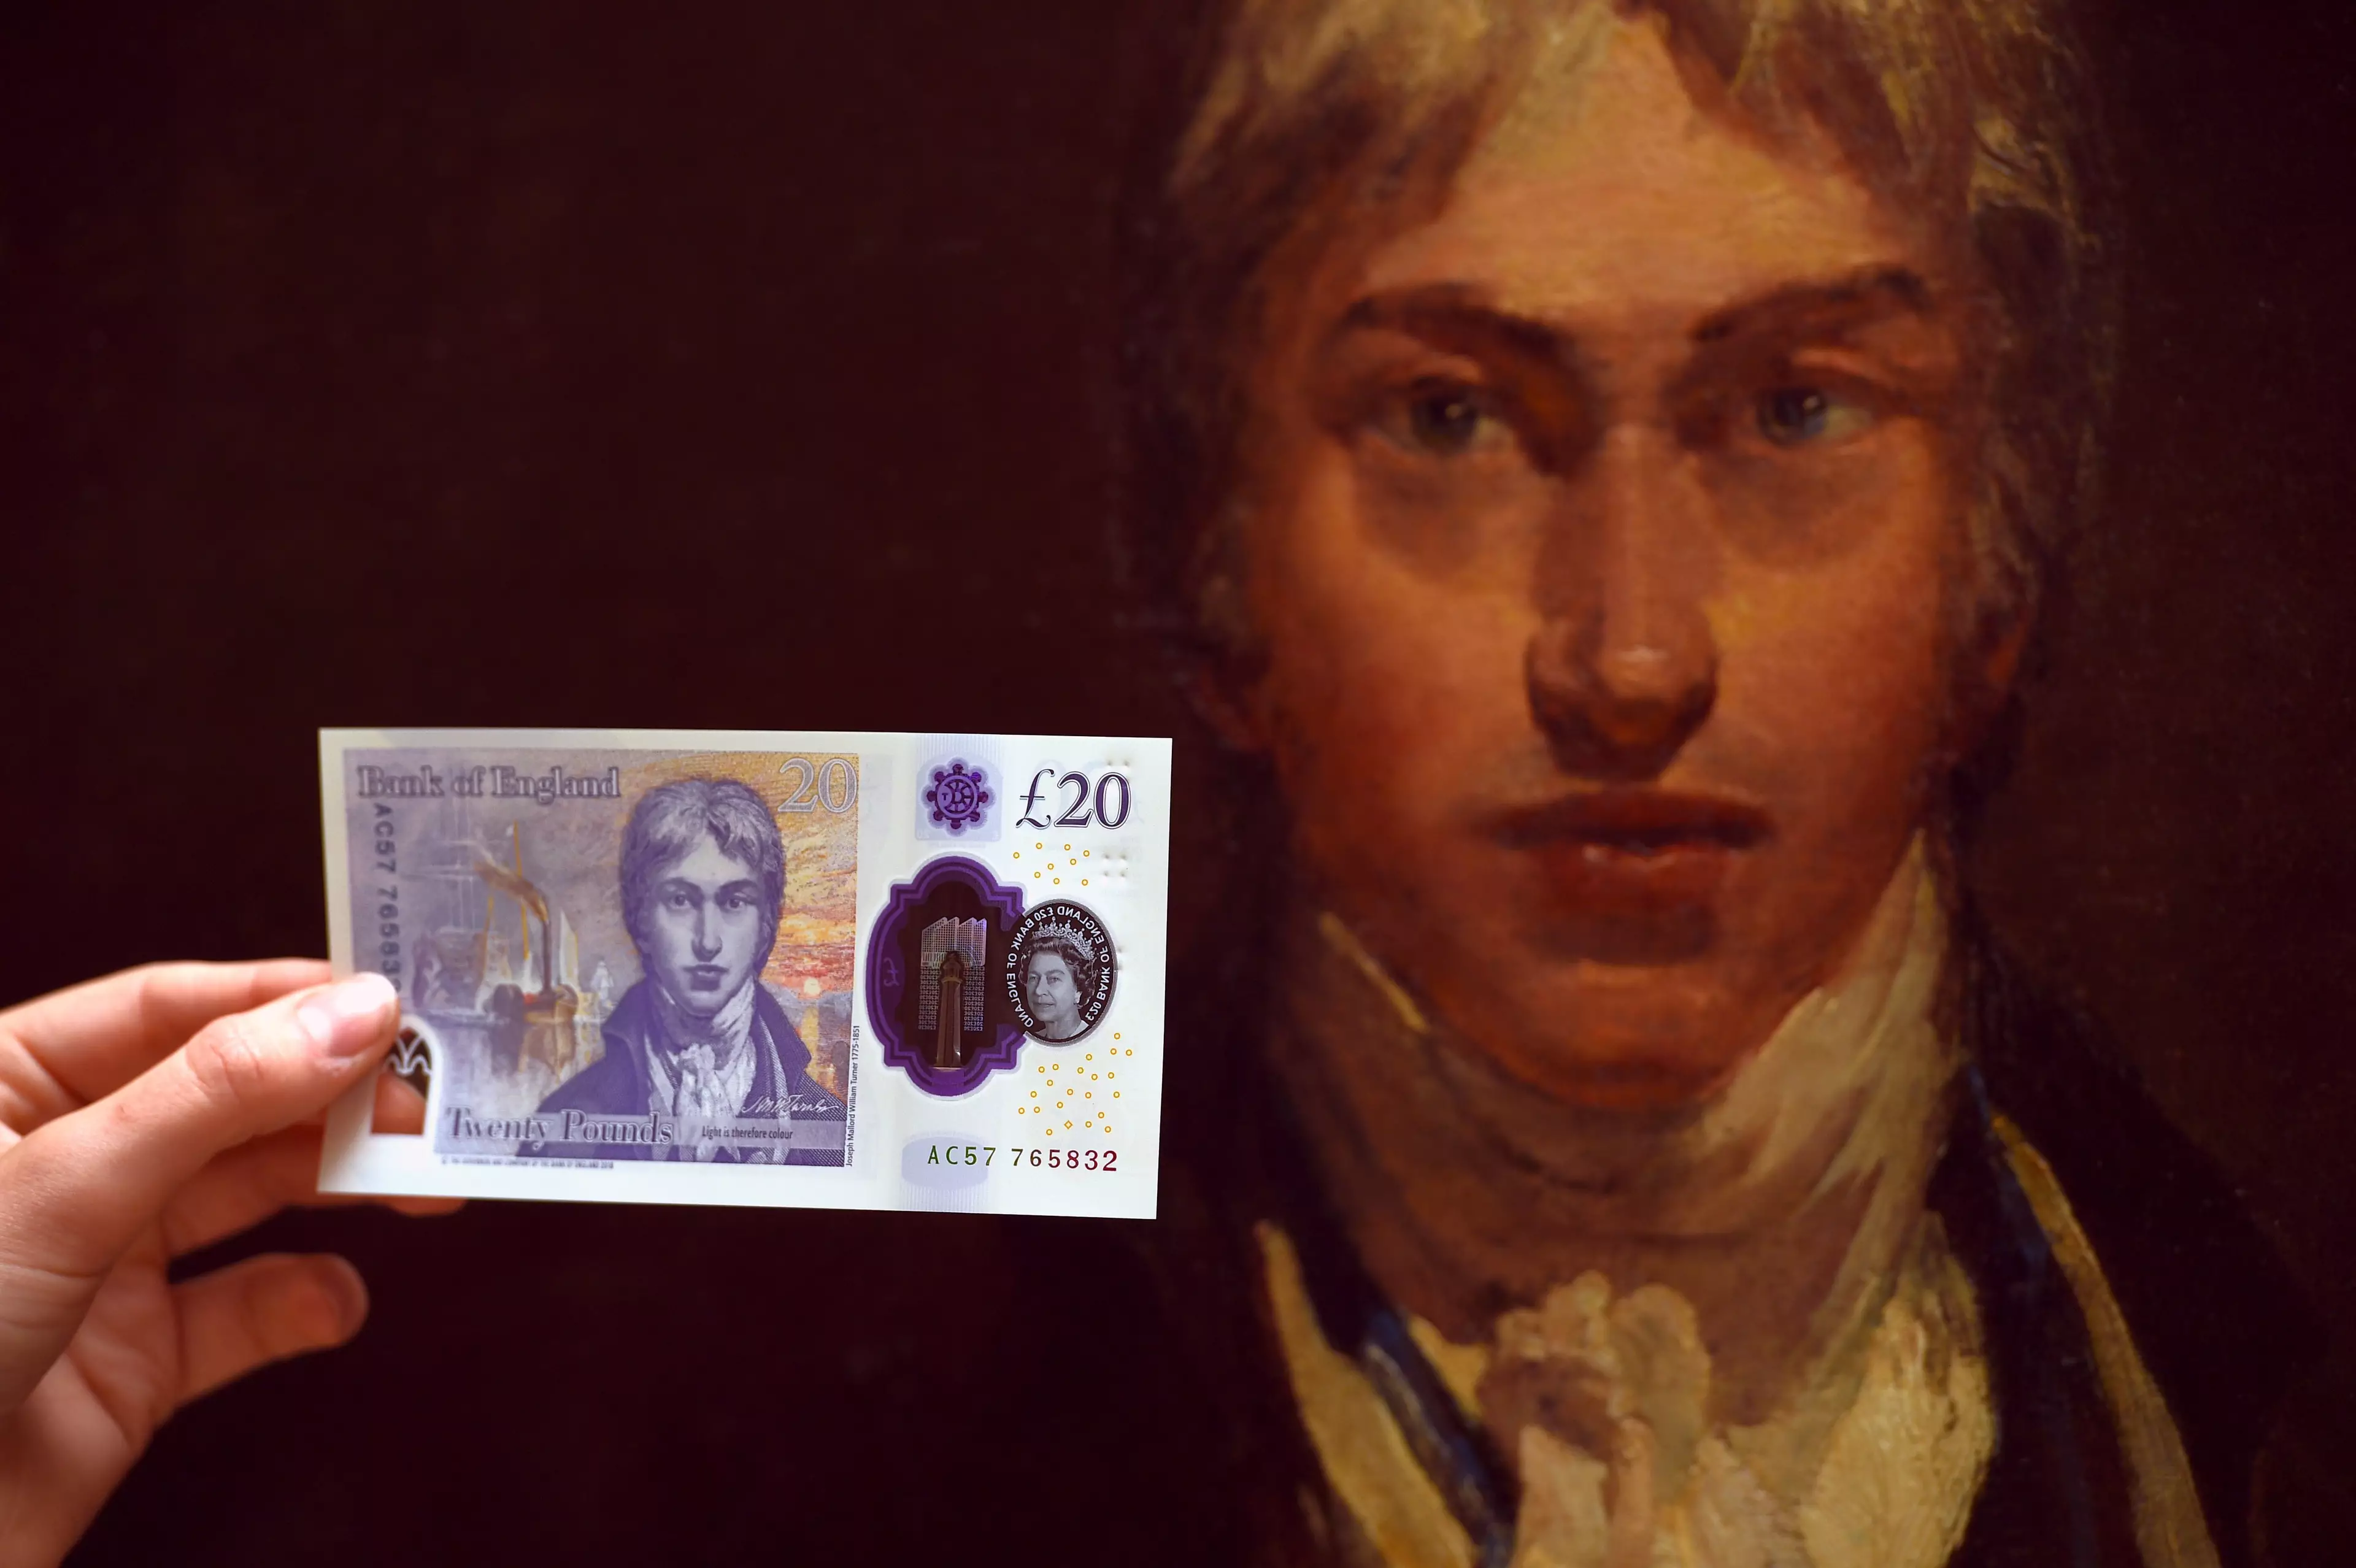 The new £20 note bears the face of artist JMW Turner.